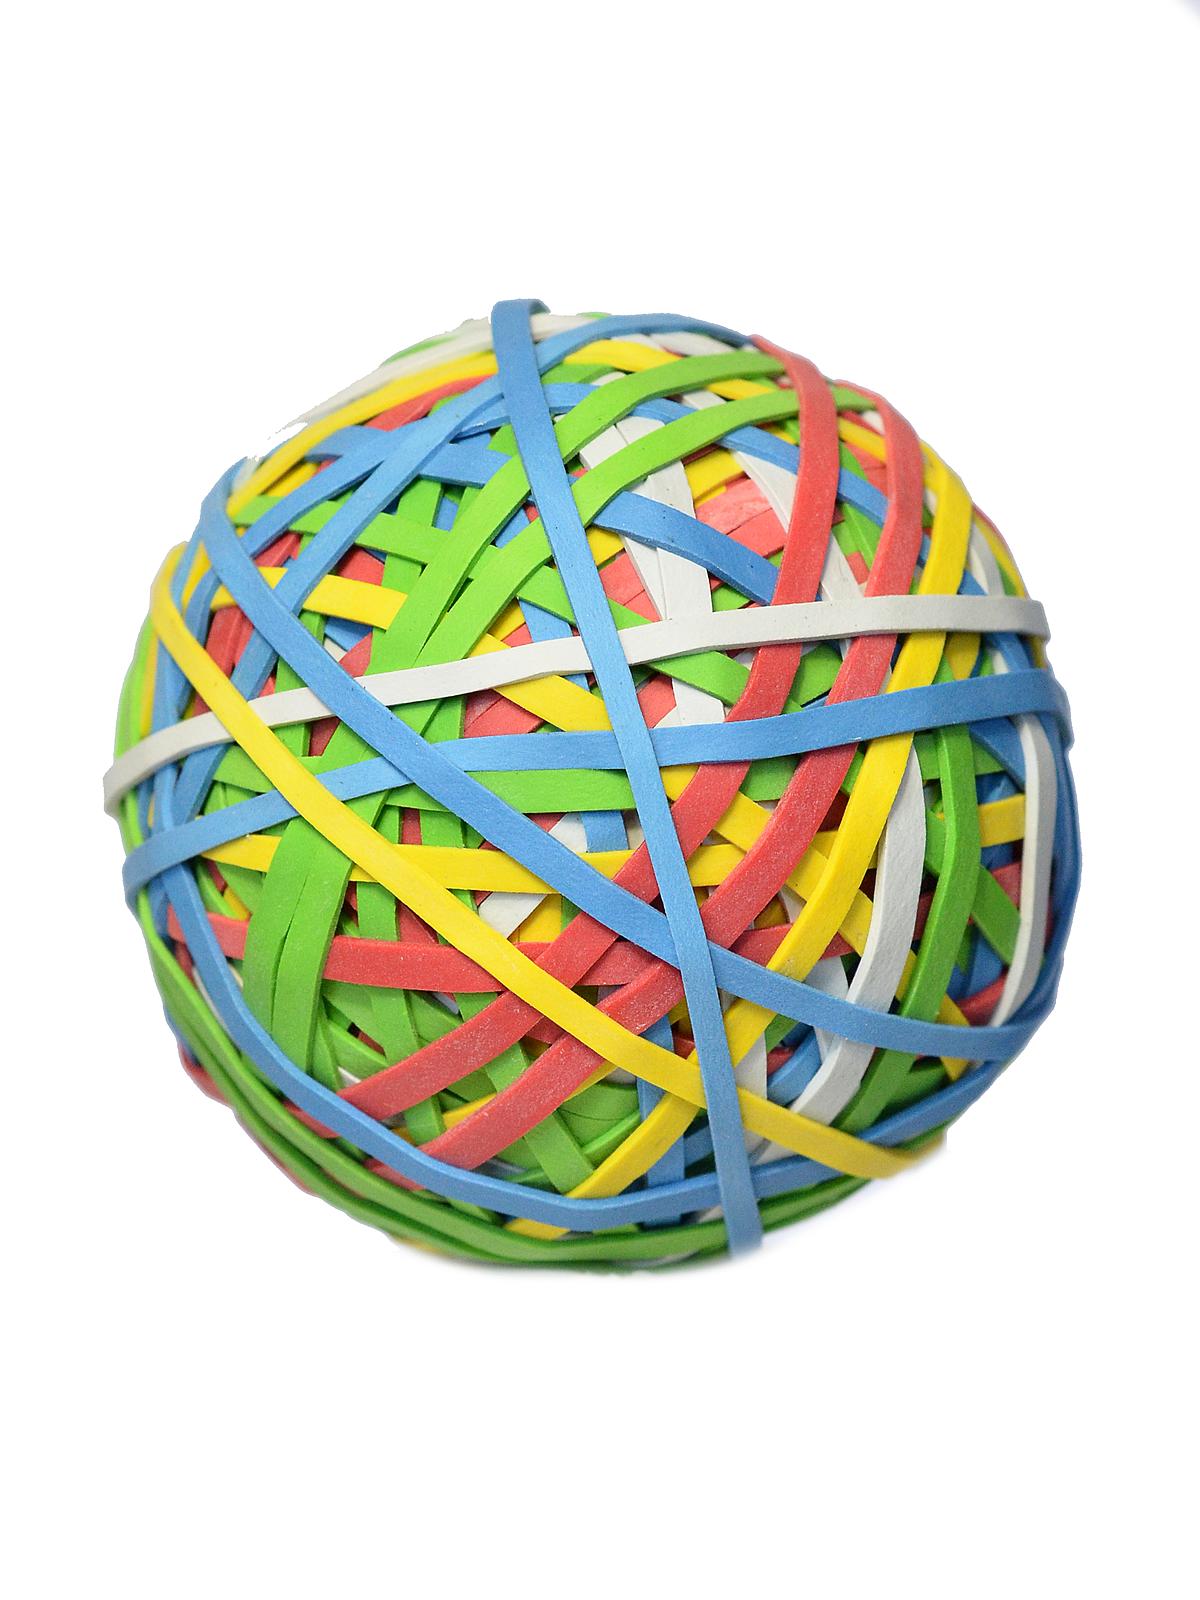 Colored Rubber Band Ball Each